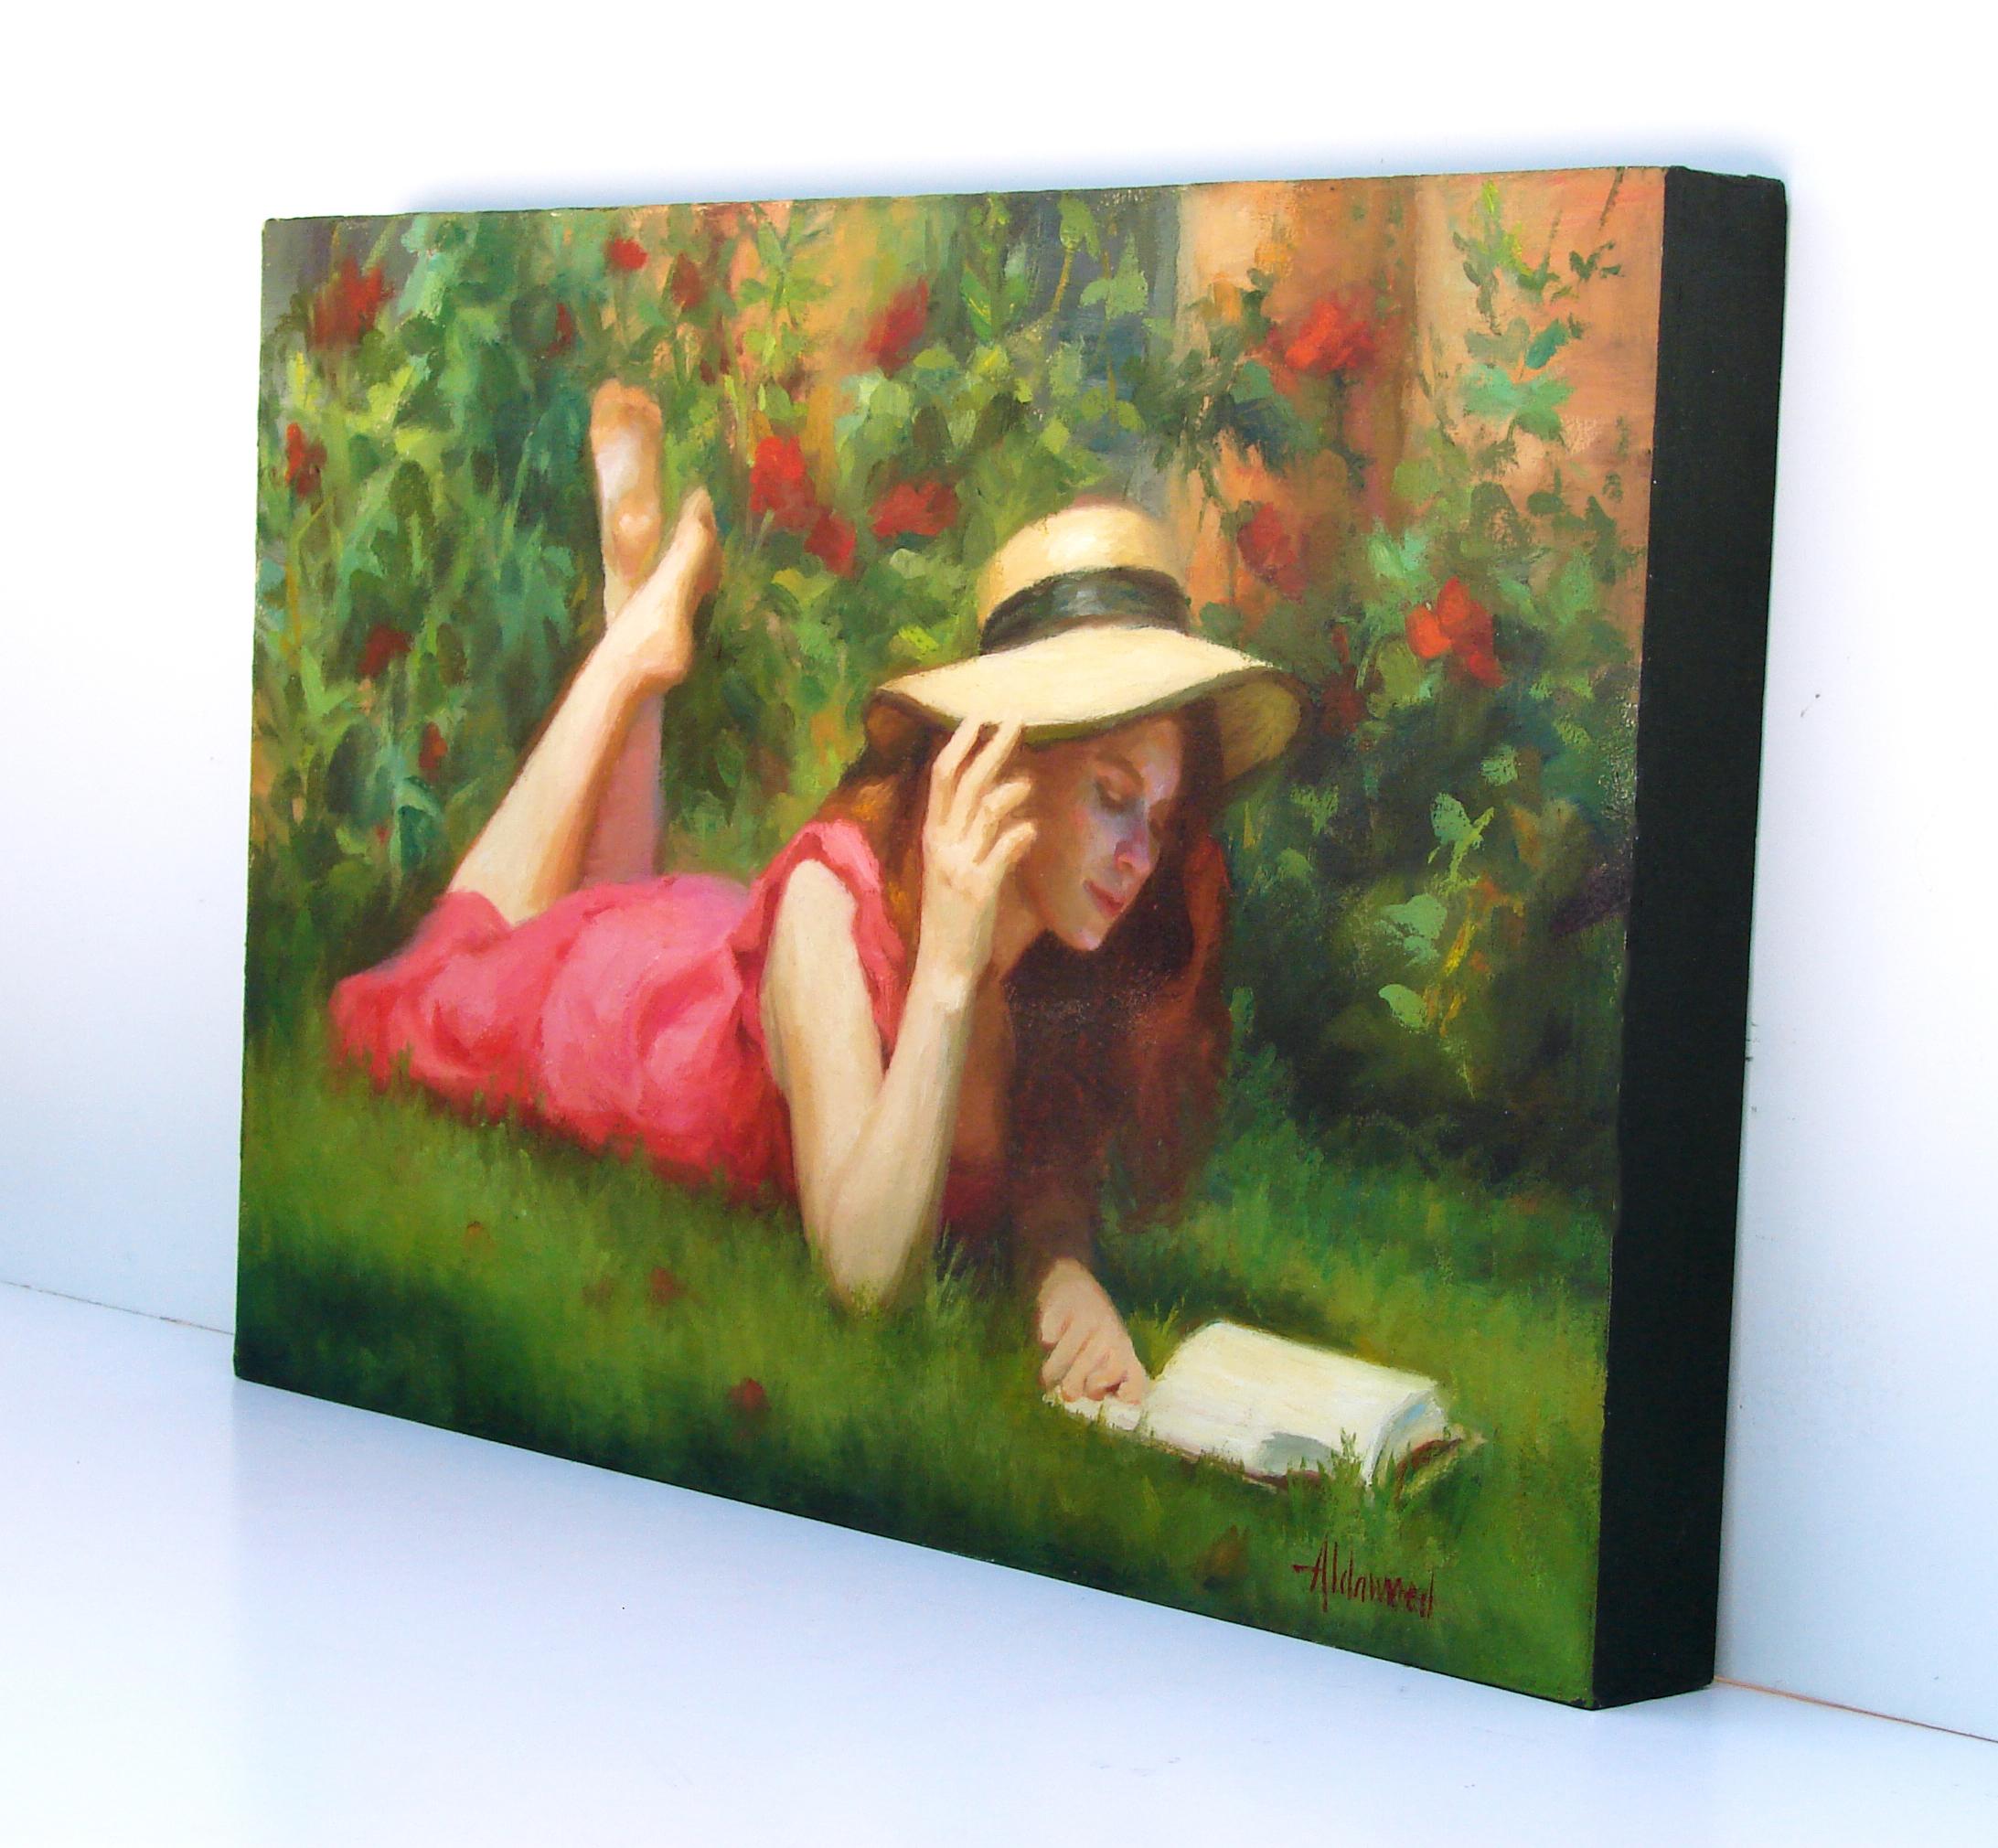 <p>Artist Comments<br>In a beautiful, sunlit garden, a young woman immerses herself in the world of literature. Surrounded by flowers, she enjoys the company of words. Bathed in a hazy glow, the scene exudes a timeless and romantic